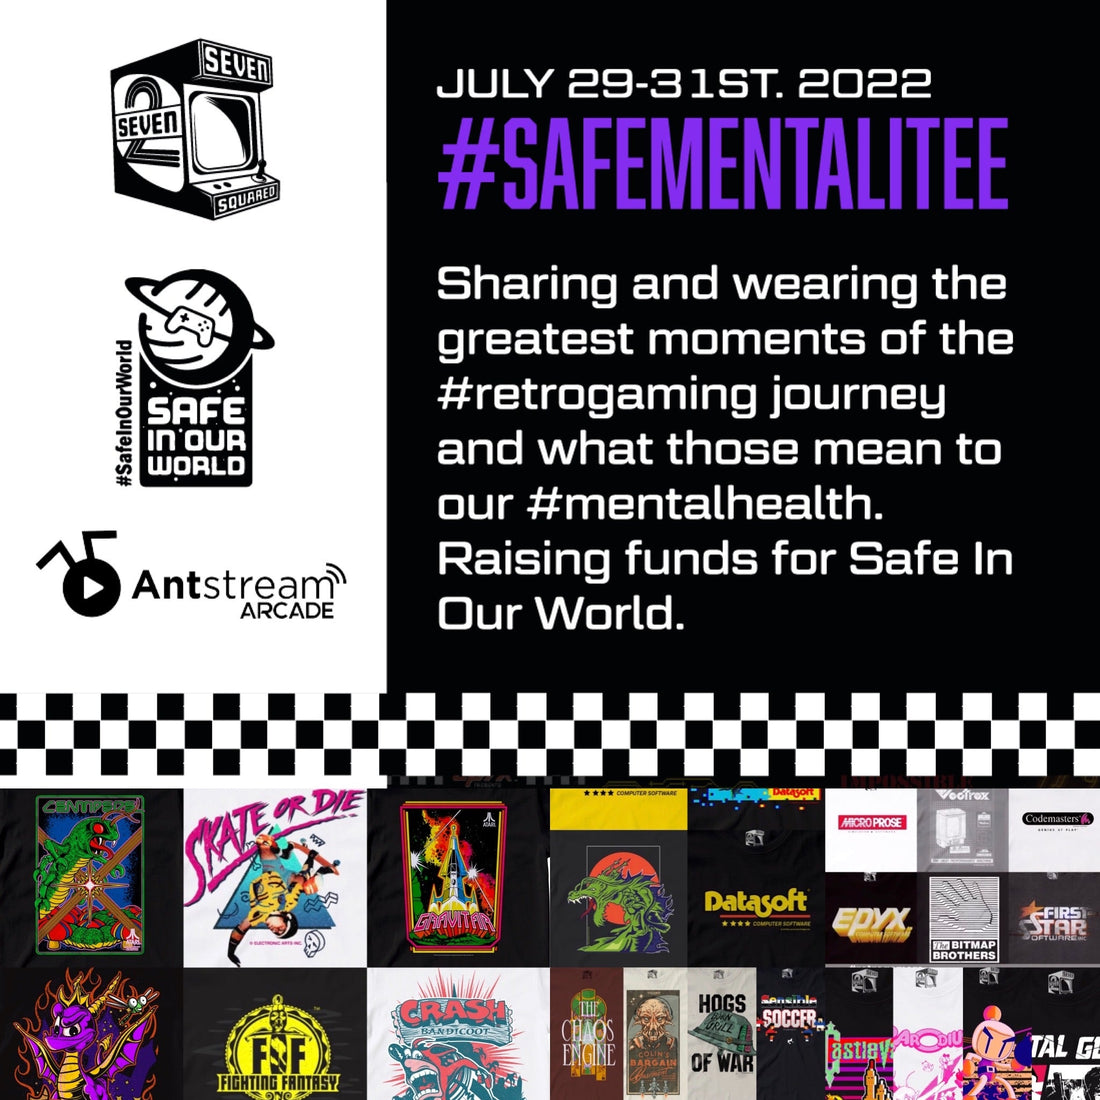 SAFEMENTALITEE EDITION 3 RAISES NEARLY £3000 FOR SAFE IN OUR WORLD